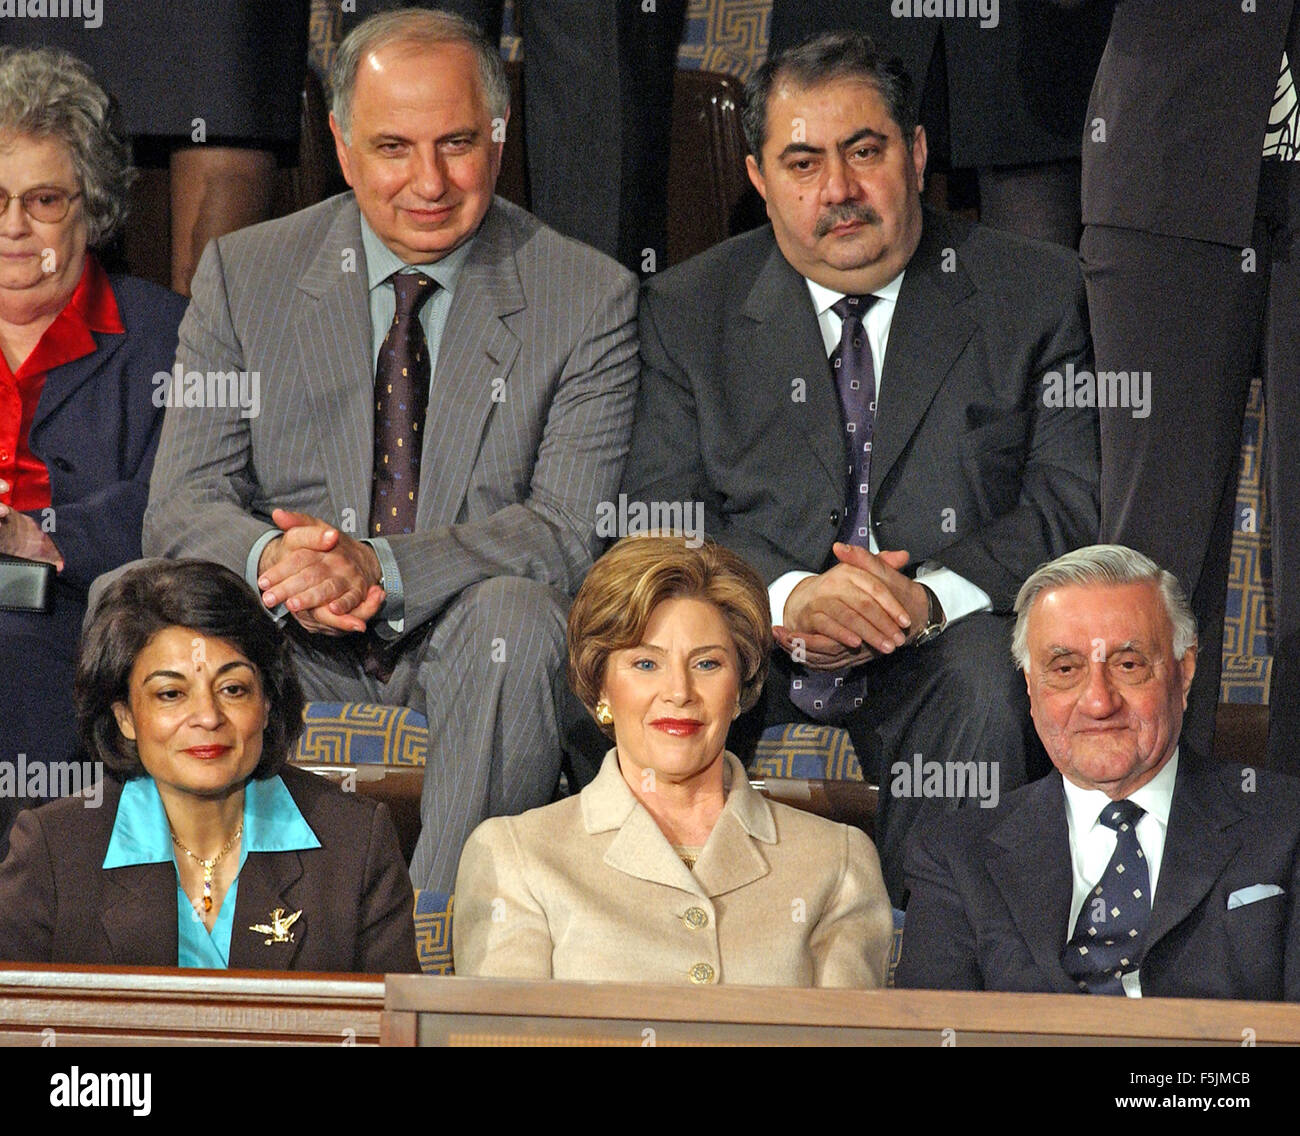 In this file photo from January 20, 2004, first lady Laura Bush sits with invited guests from the Iraqi Governing Council for her husband, United States President George W. Bush's 2004 State of the Union Address to a Joint Session of the United States Congress at the Capitol in Washington, DC on January 20, 2004. Left to right in the top row: Doctor Ahmed Chalabi, Iraqi Governing Council; and Hoshyar Zebari, Iraqi Interim Foreign Minister. Left to right on the bottom row: Ms. Rend al-Rahim, Iraqi Senior Diplomatic Representative; first lady Laura Bush; and Doctor Adnan Pachachi, President, I Stock Photo